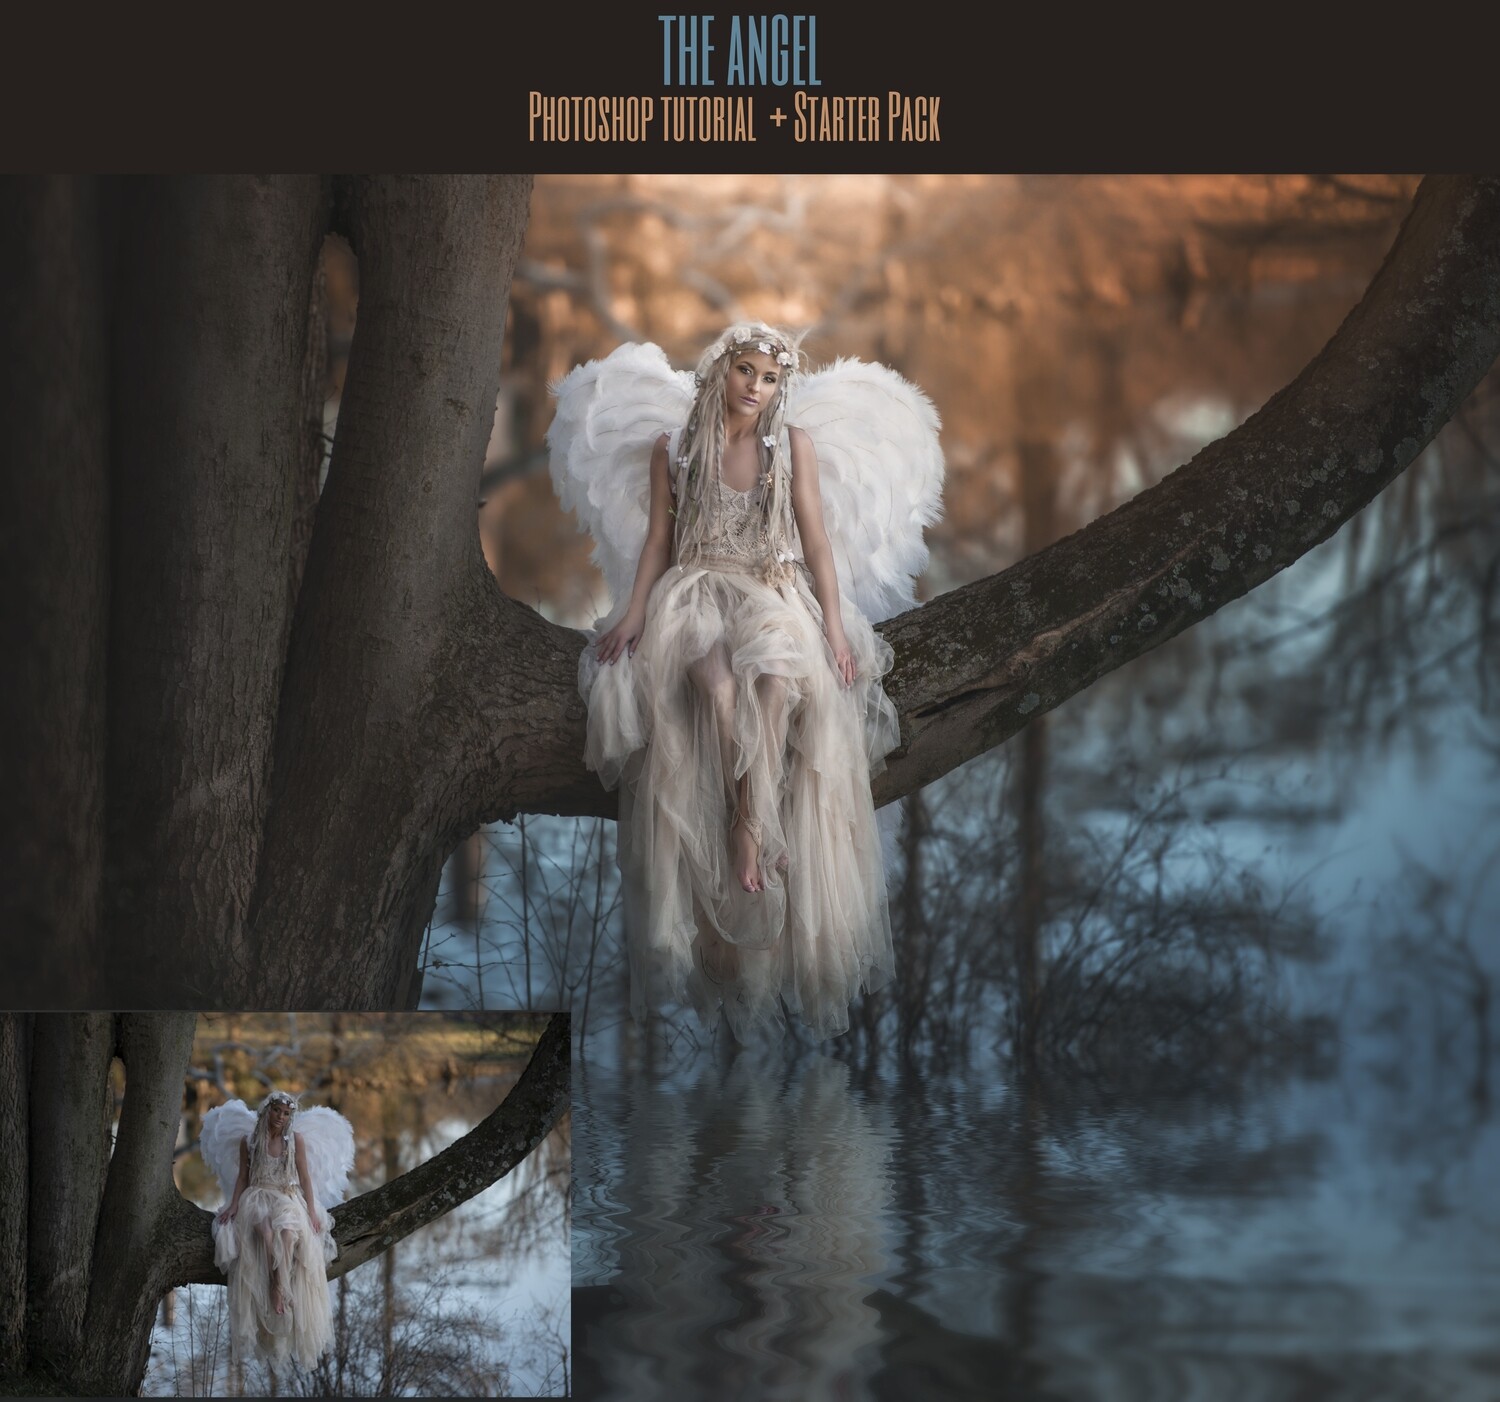 The Angel Painterly Editing Photoshop Tutorial with STARTER PACK- Fine Art Tutorial by Tara Mapes